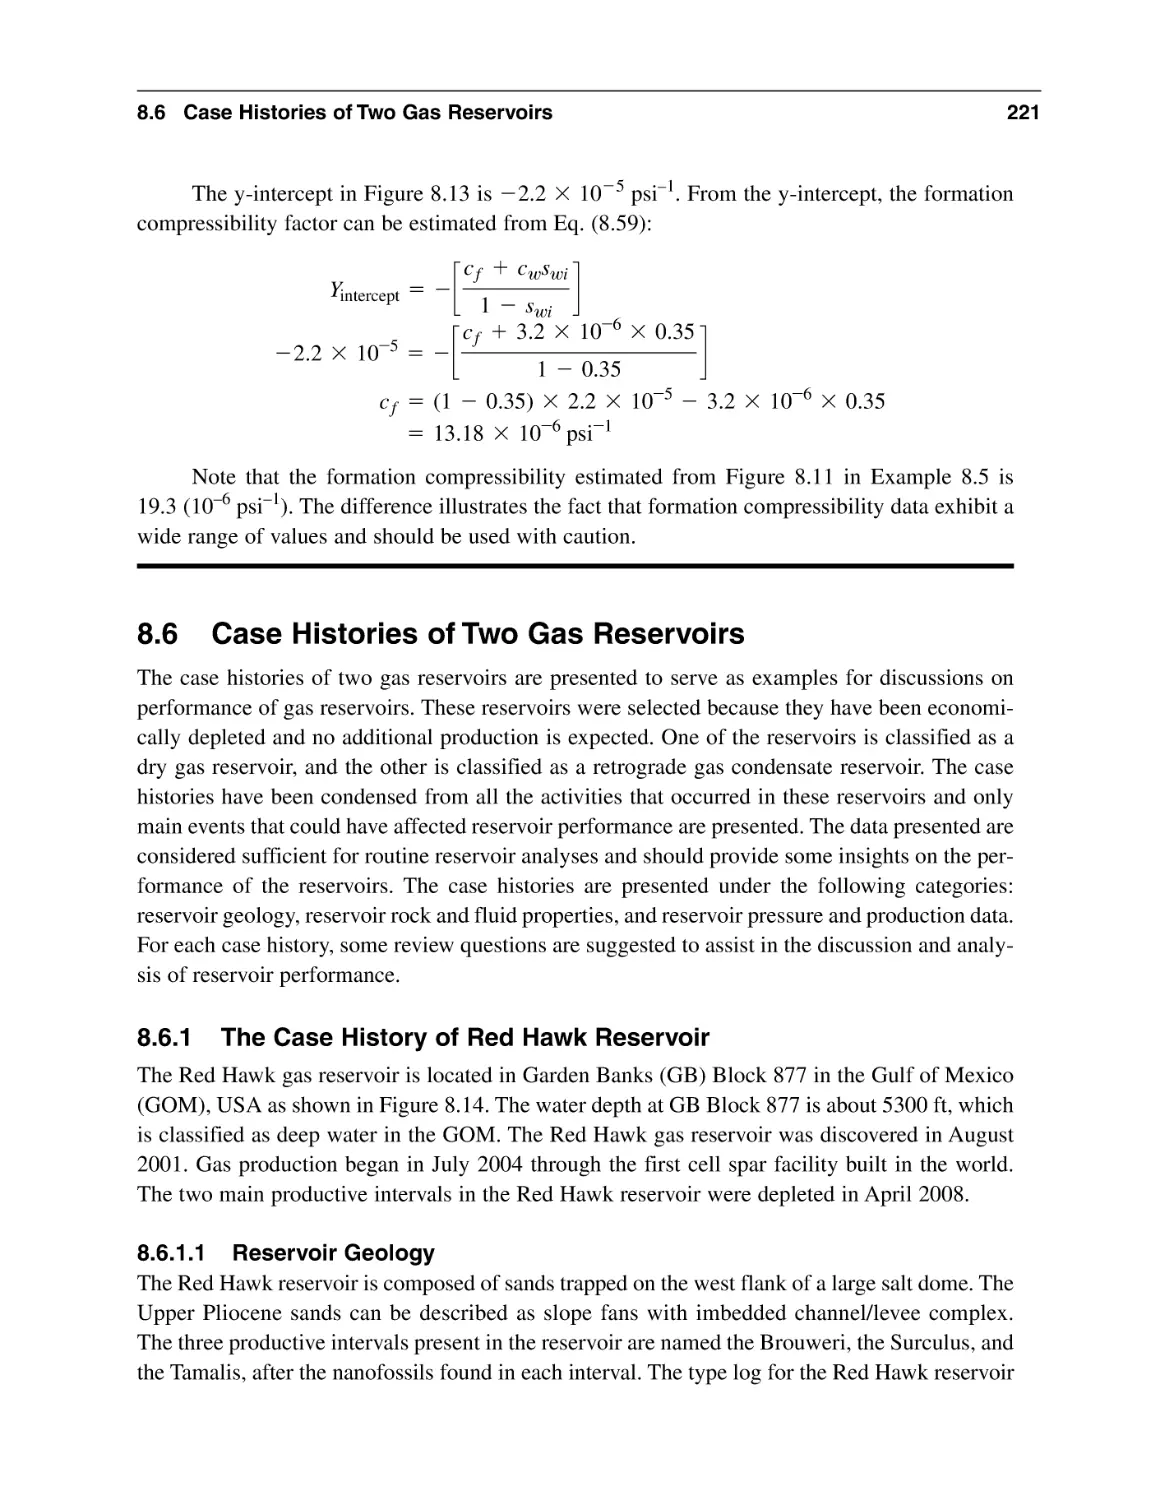 8.6 Case Histories of Two Gas Reservoirs
8.6.1 The Case History of Red Hawk Reservoir